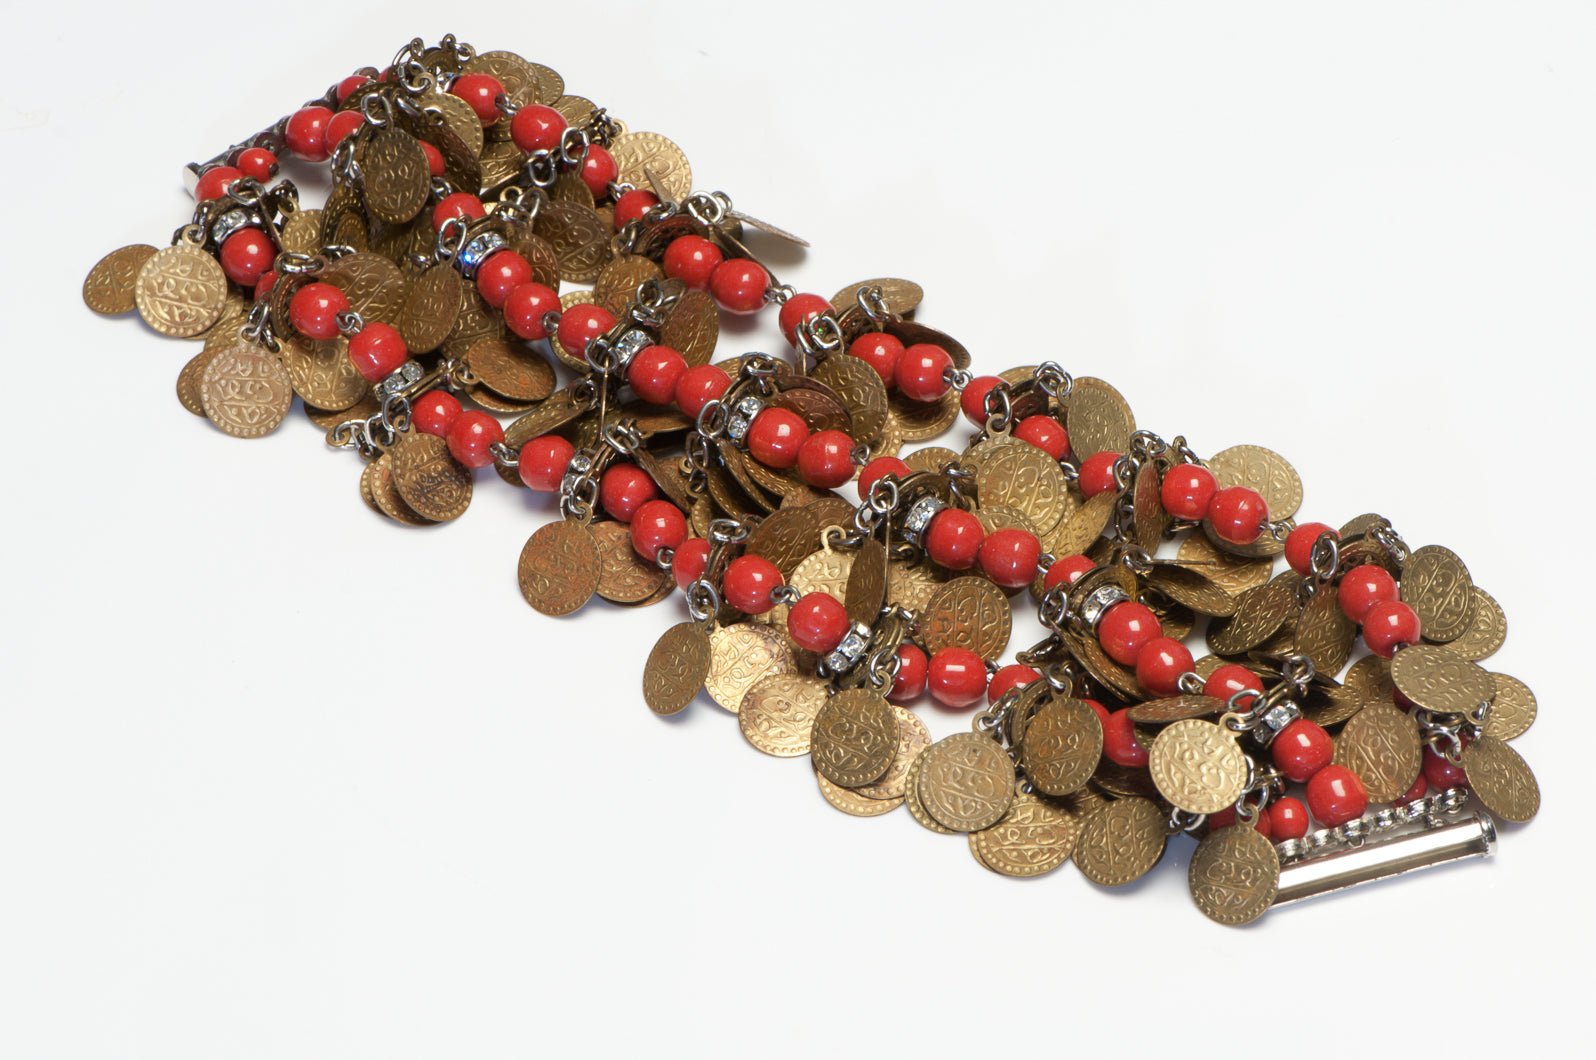 Vintage Italian Wide Red Glass Beads Crystal Coin Charm Bracelet